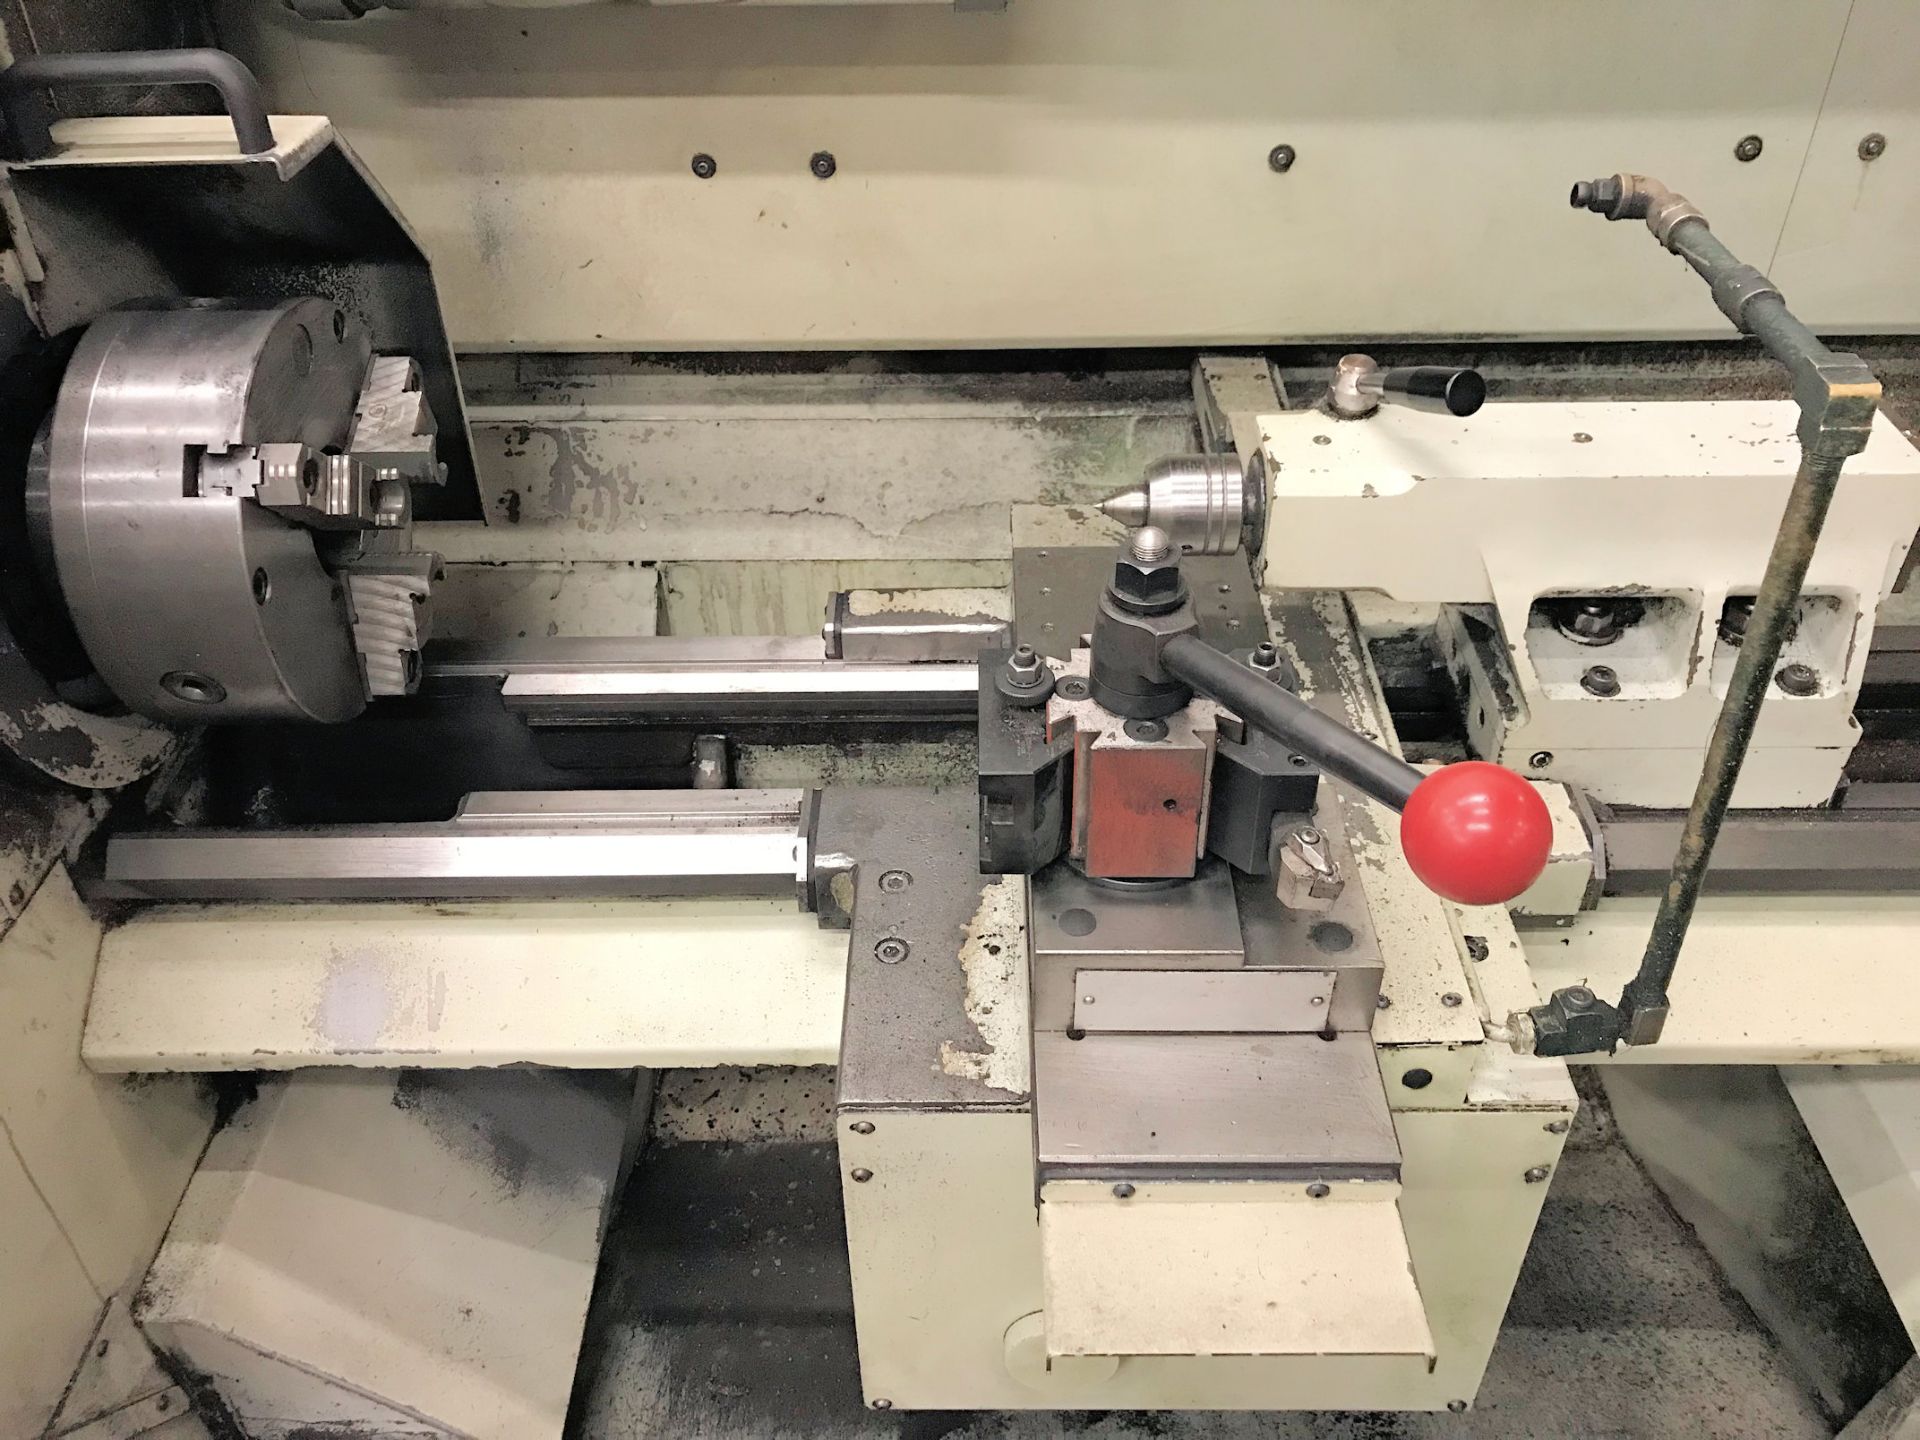 MILLTRONICS TL14 CNC LATHE, 14" SWING OVER BED, 36" BETWEEN CENTERS, 100-3,000 RPM, 12-HP, TOOL - Image 4 of 7